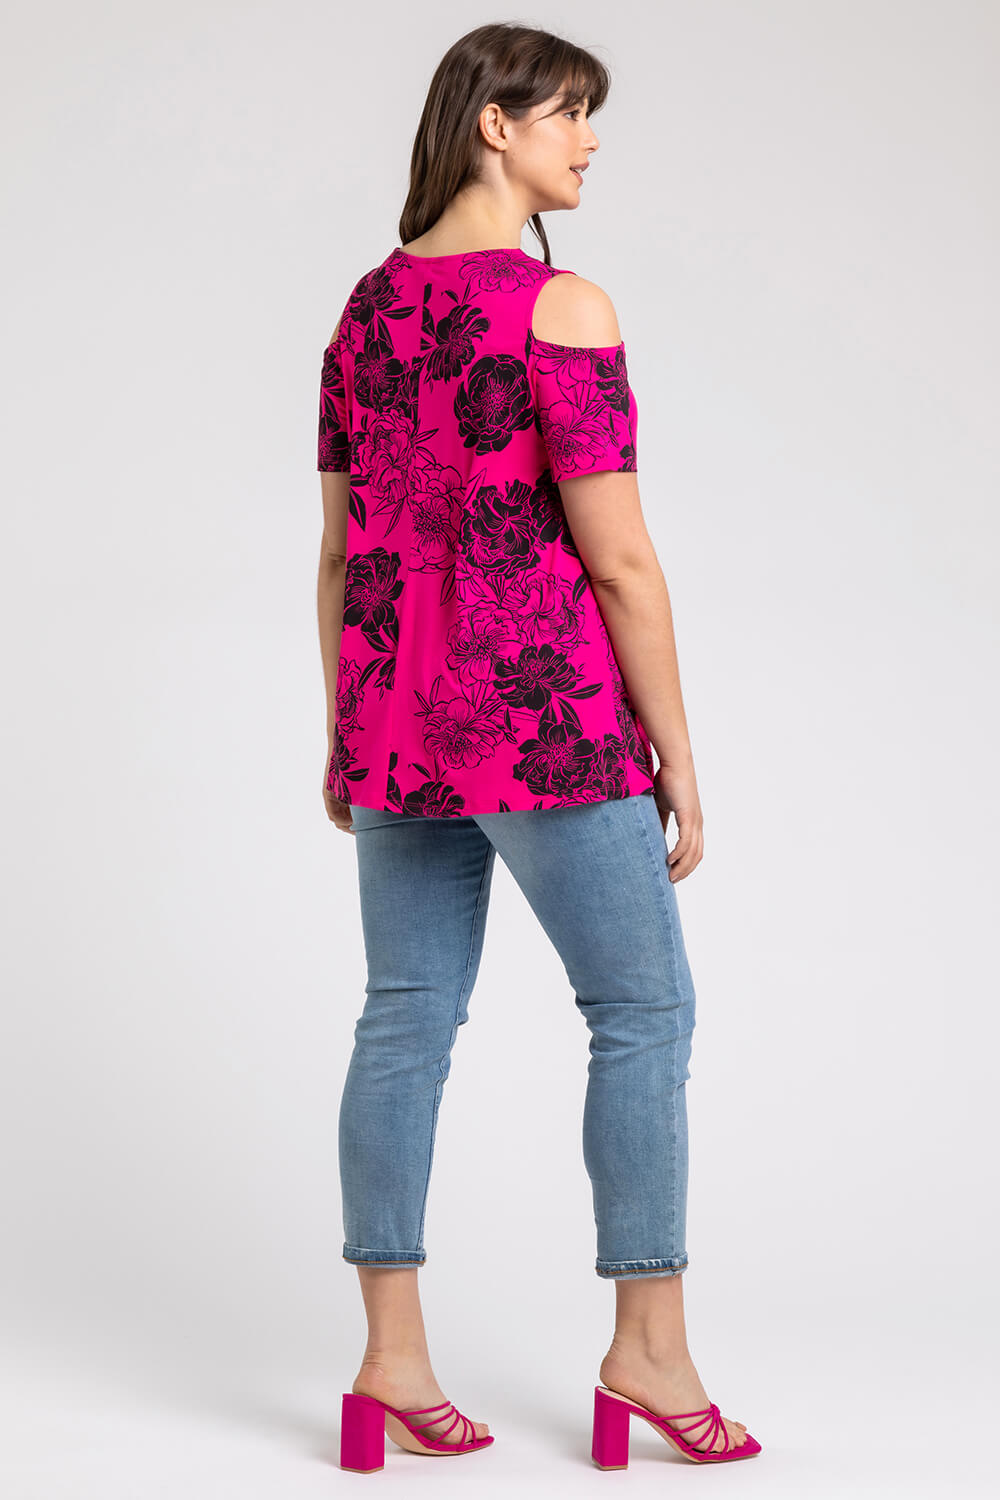 Fuchsia Curve Floral Print Cold Shoulder Jersey Top, Image 2 of 4